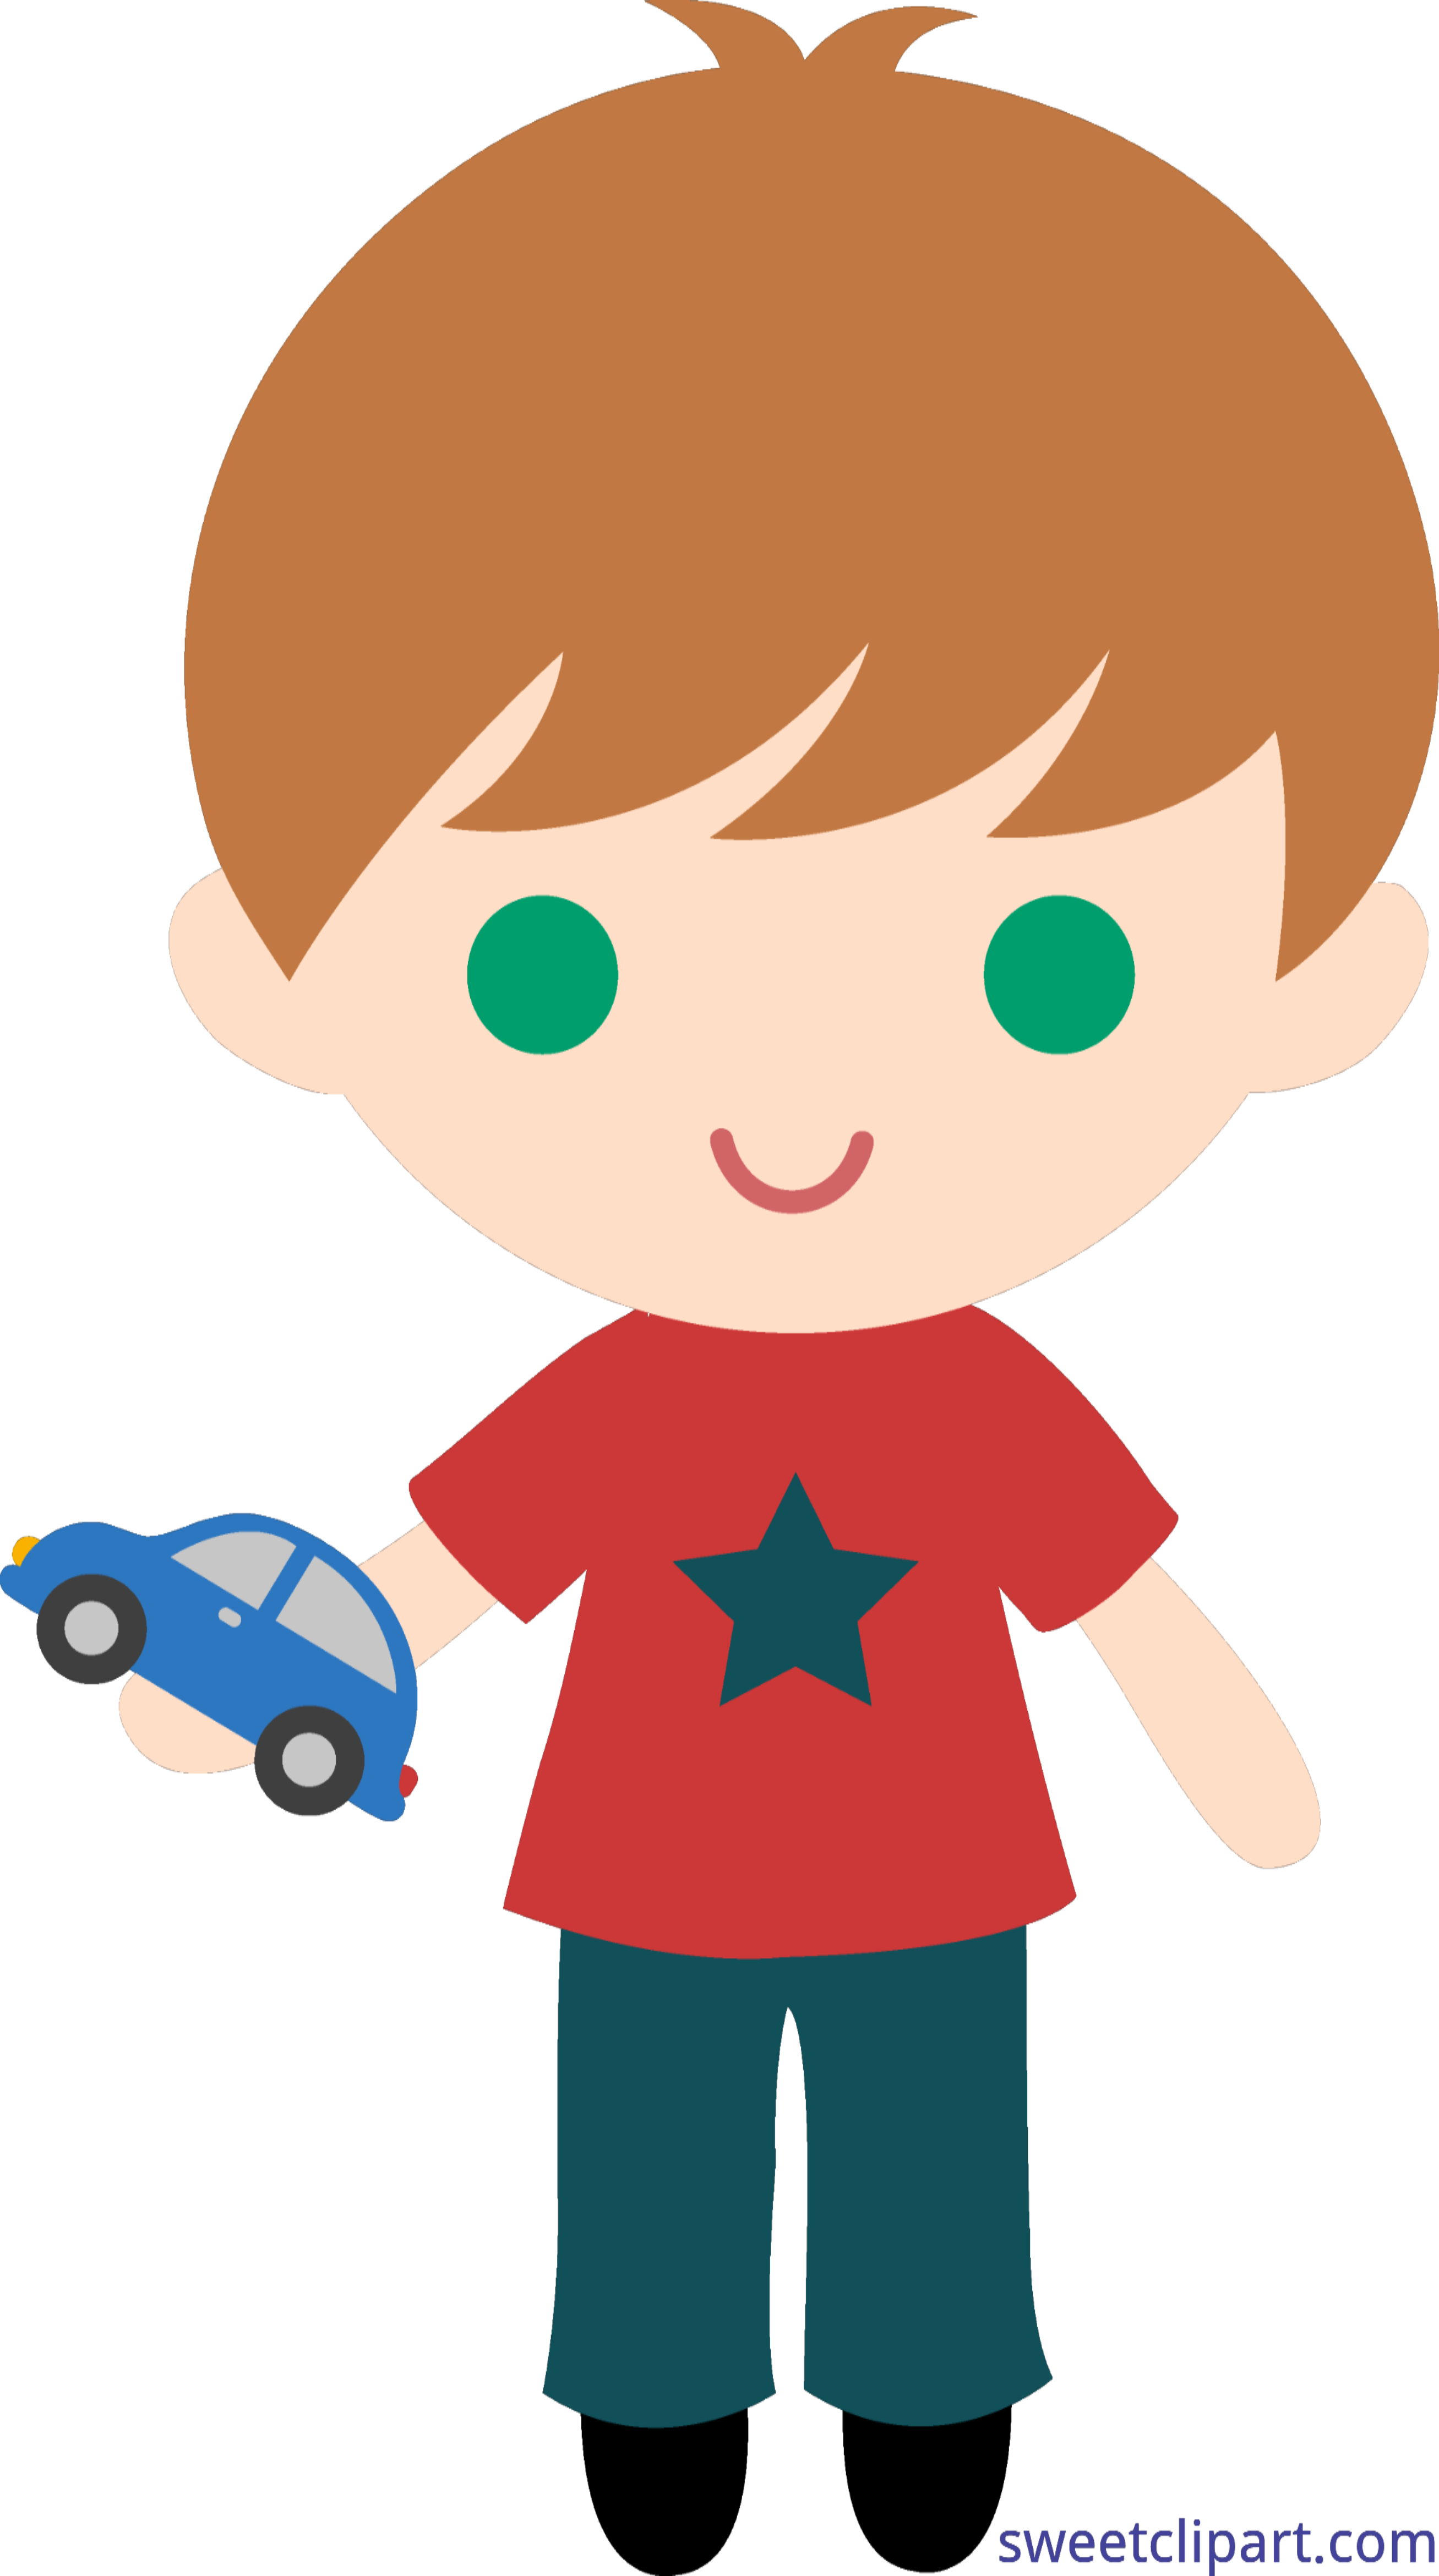 clipart car toy